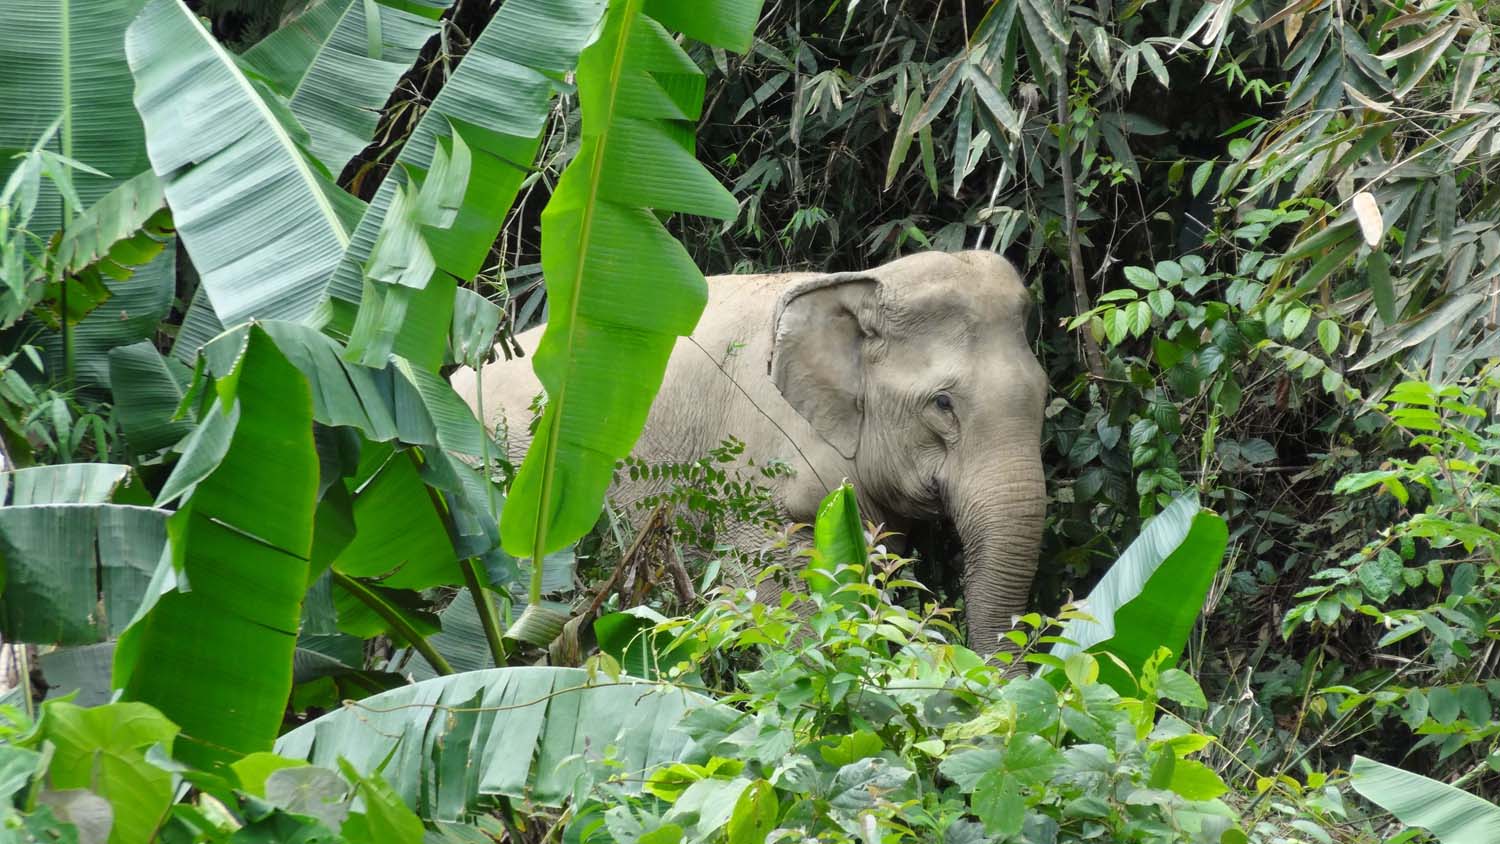 an elephant emerges out of the jungle